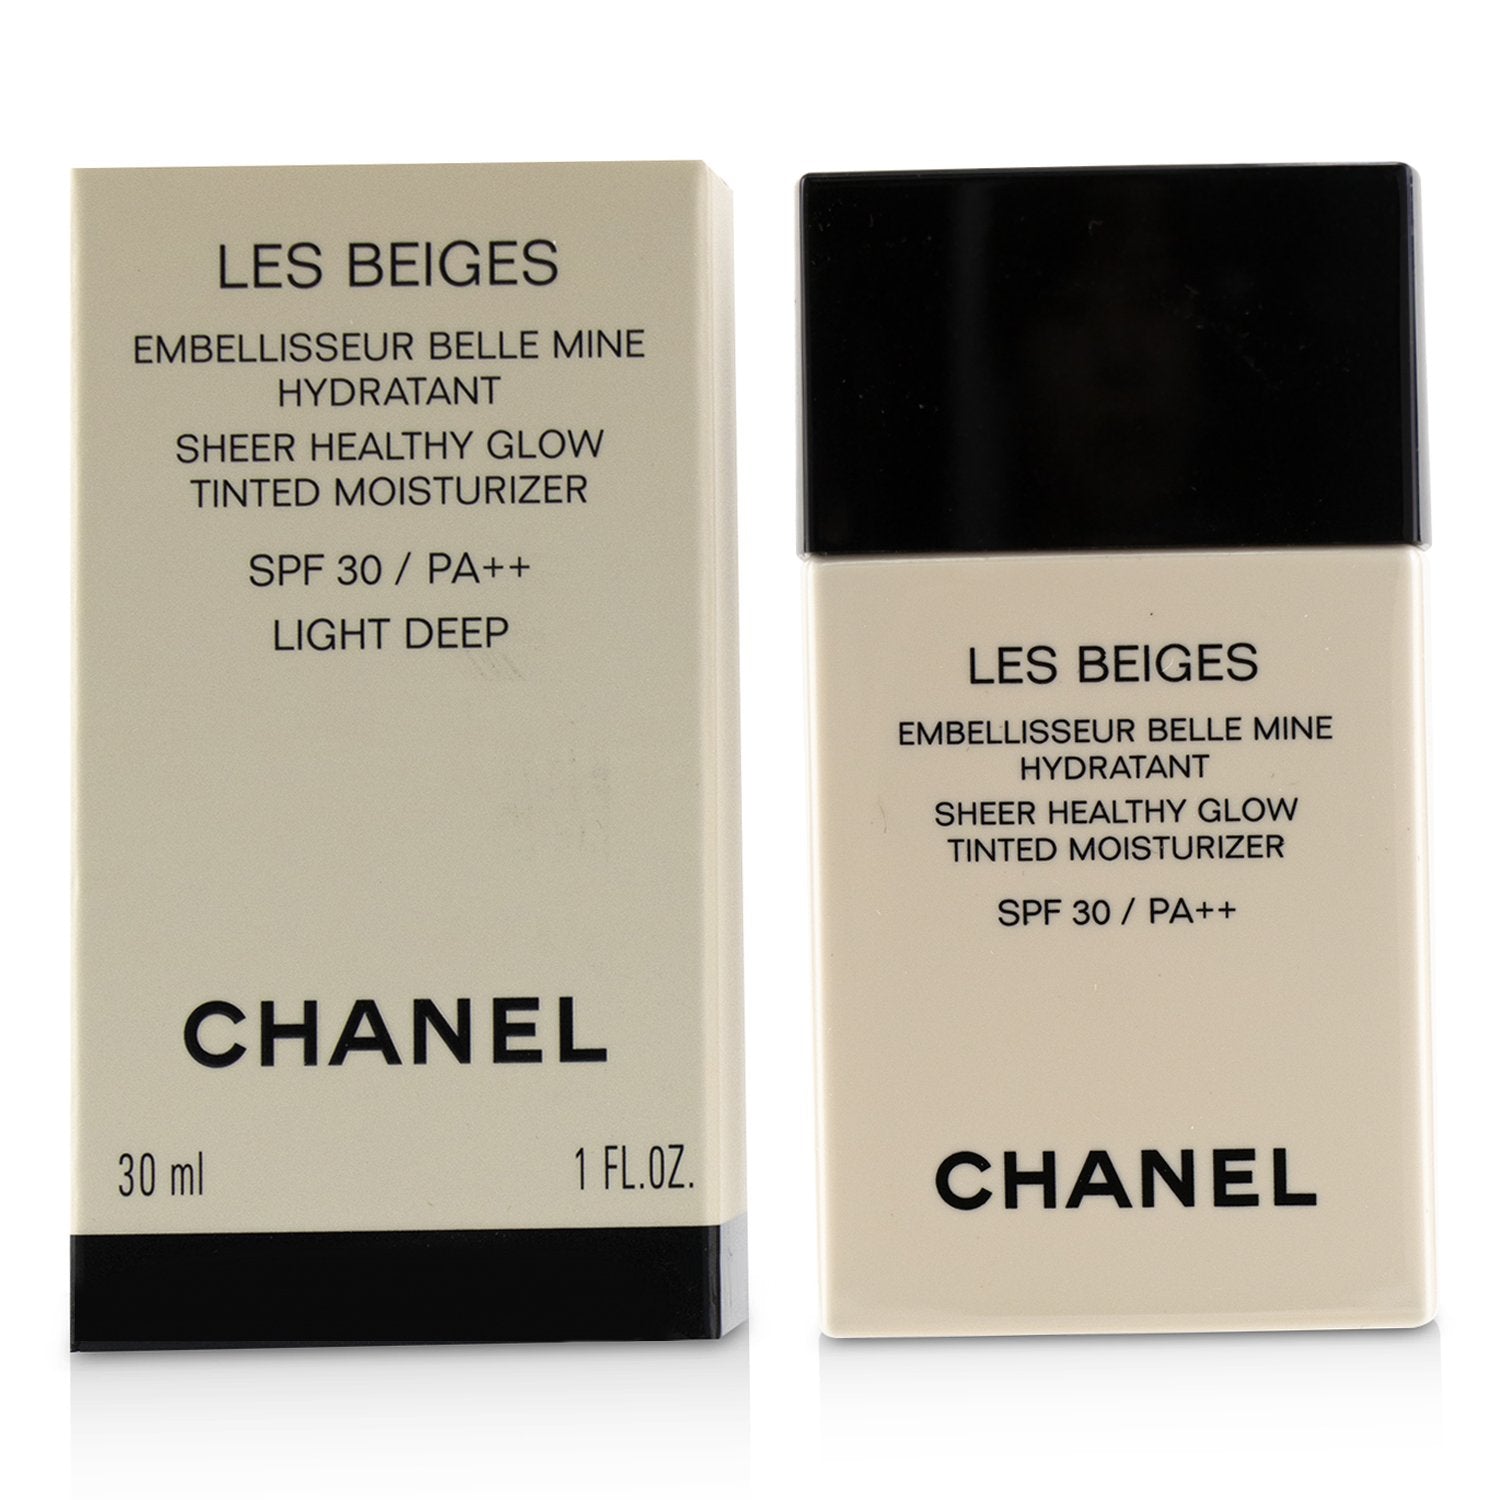  Les Beiges Healthy Glow Sheer Colour Broad Spectrum SPF 15  Sunscreen # 30 : Beauty & Personal Care